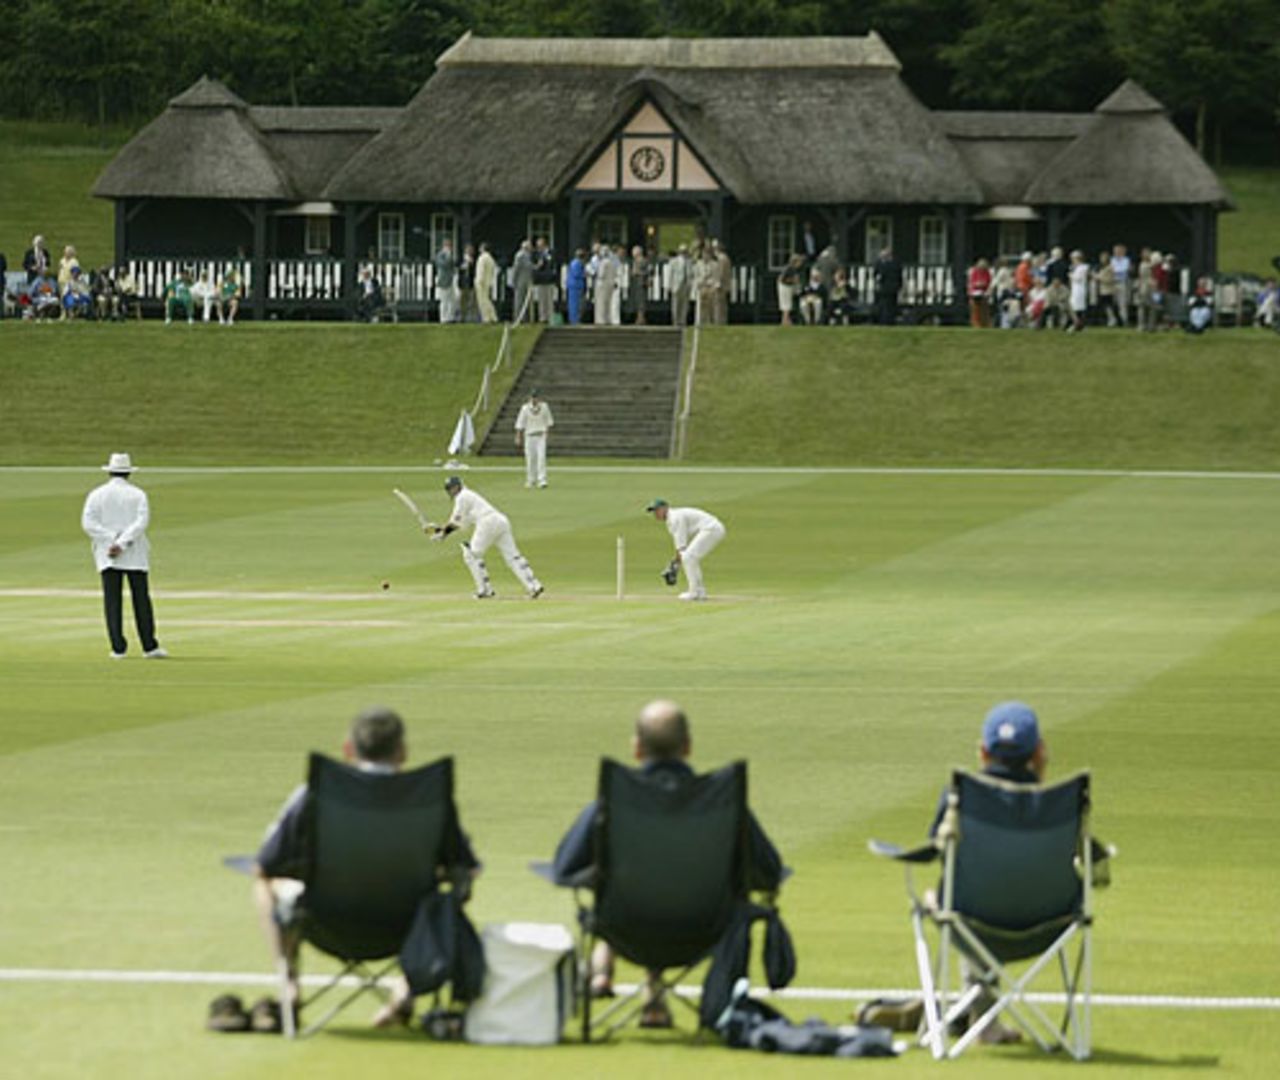 Sir Paul Getty's XI play the touring South Africans at Wormsley Park, June 23, 2003